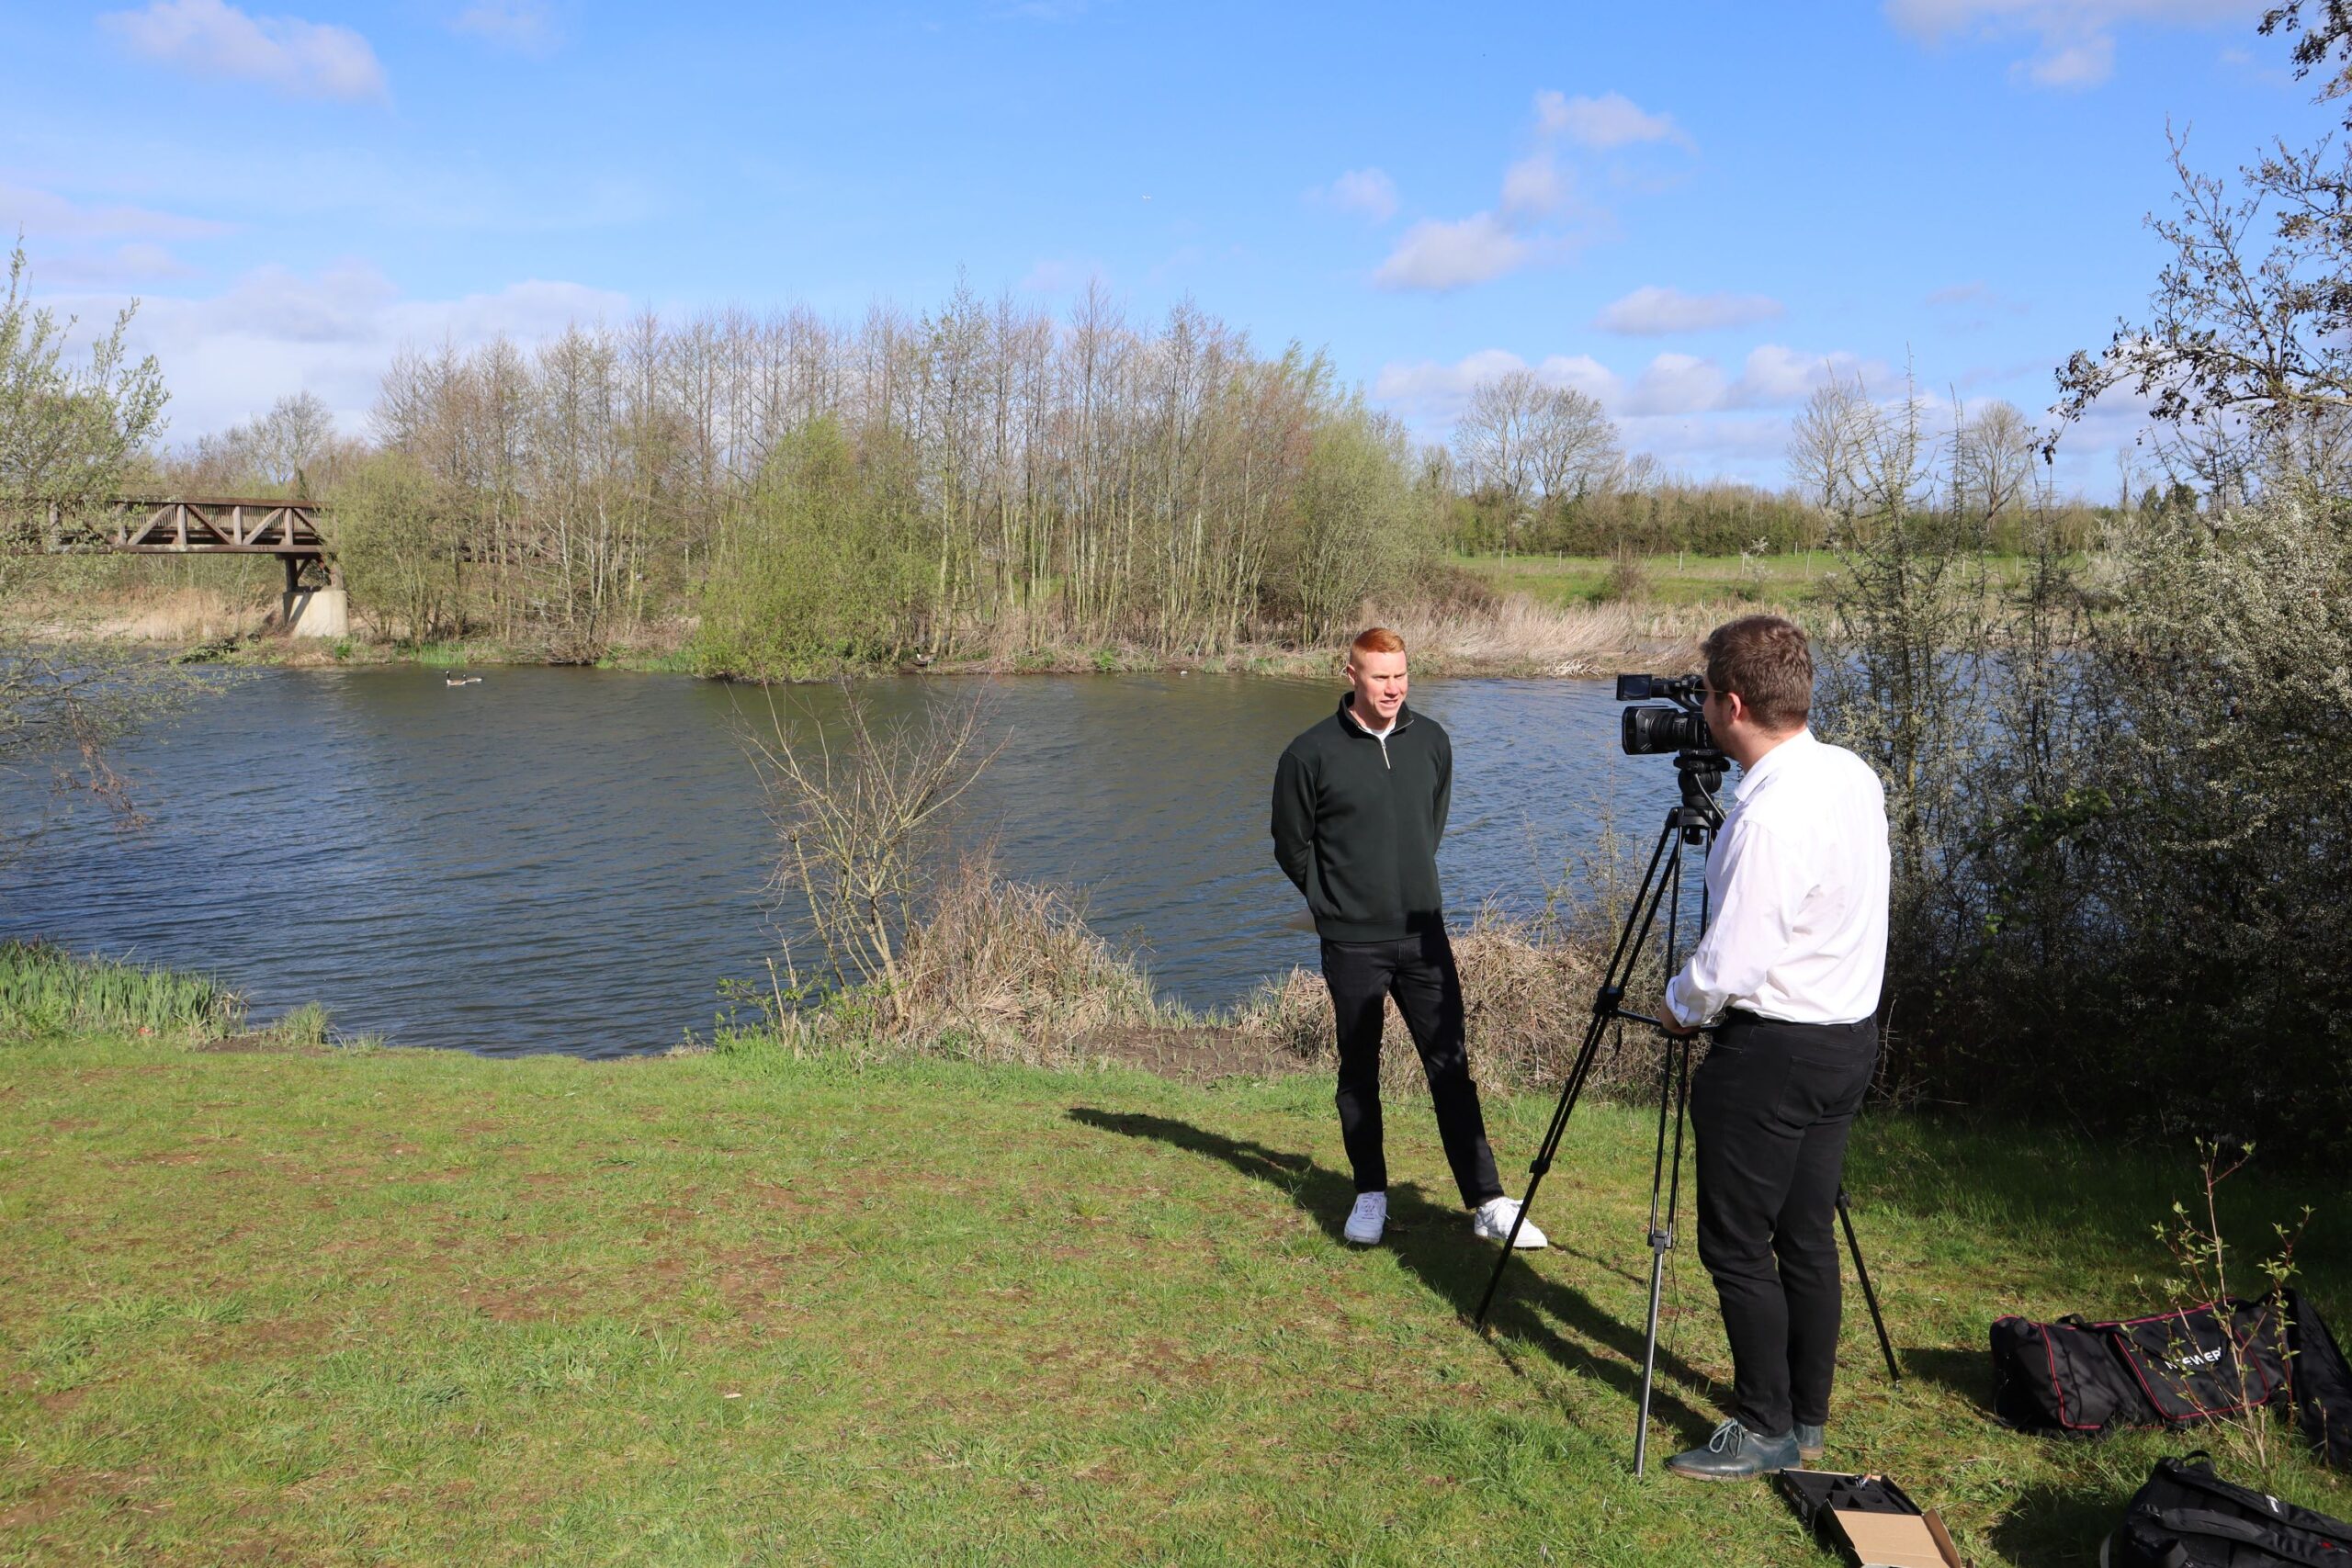 Filming with Olympic gold medallist swimmer Tom Dean MBE on the bank of the Jubilee Flood Alleviation Channel 2